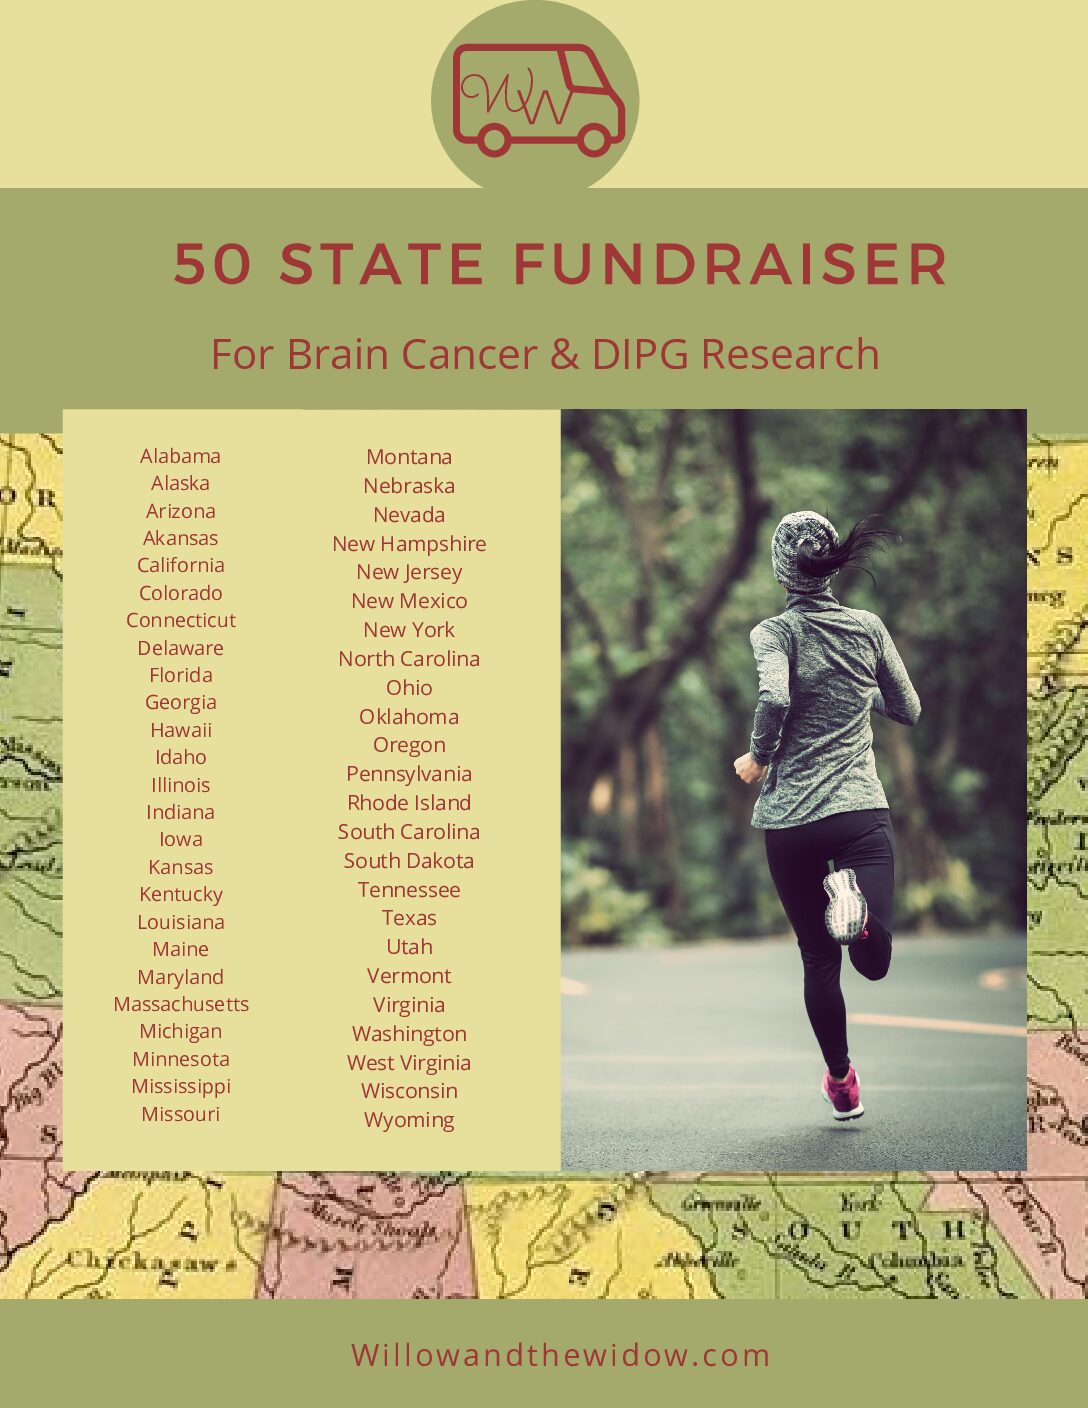 50 State Fundraising Goal